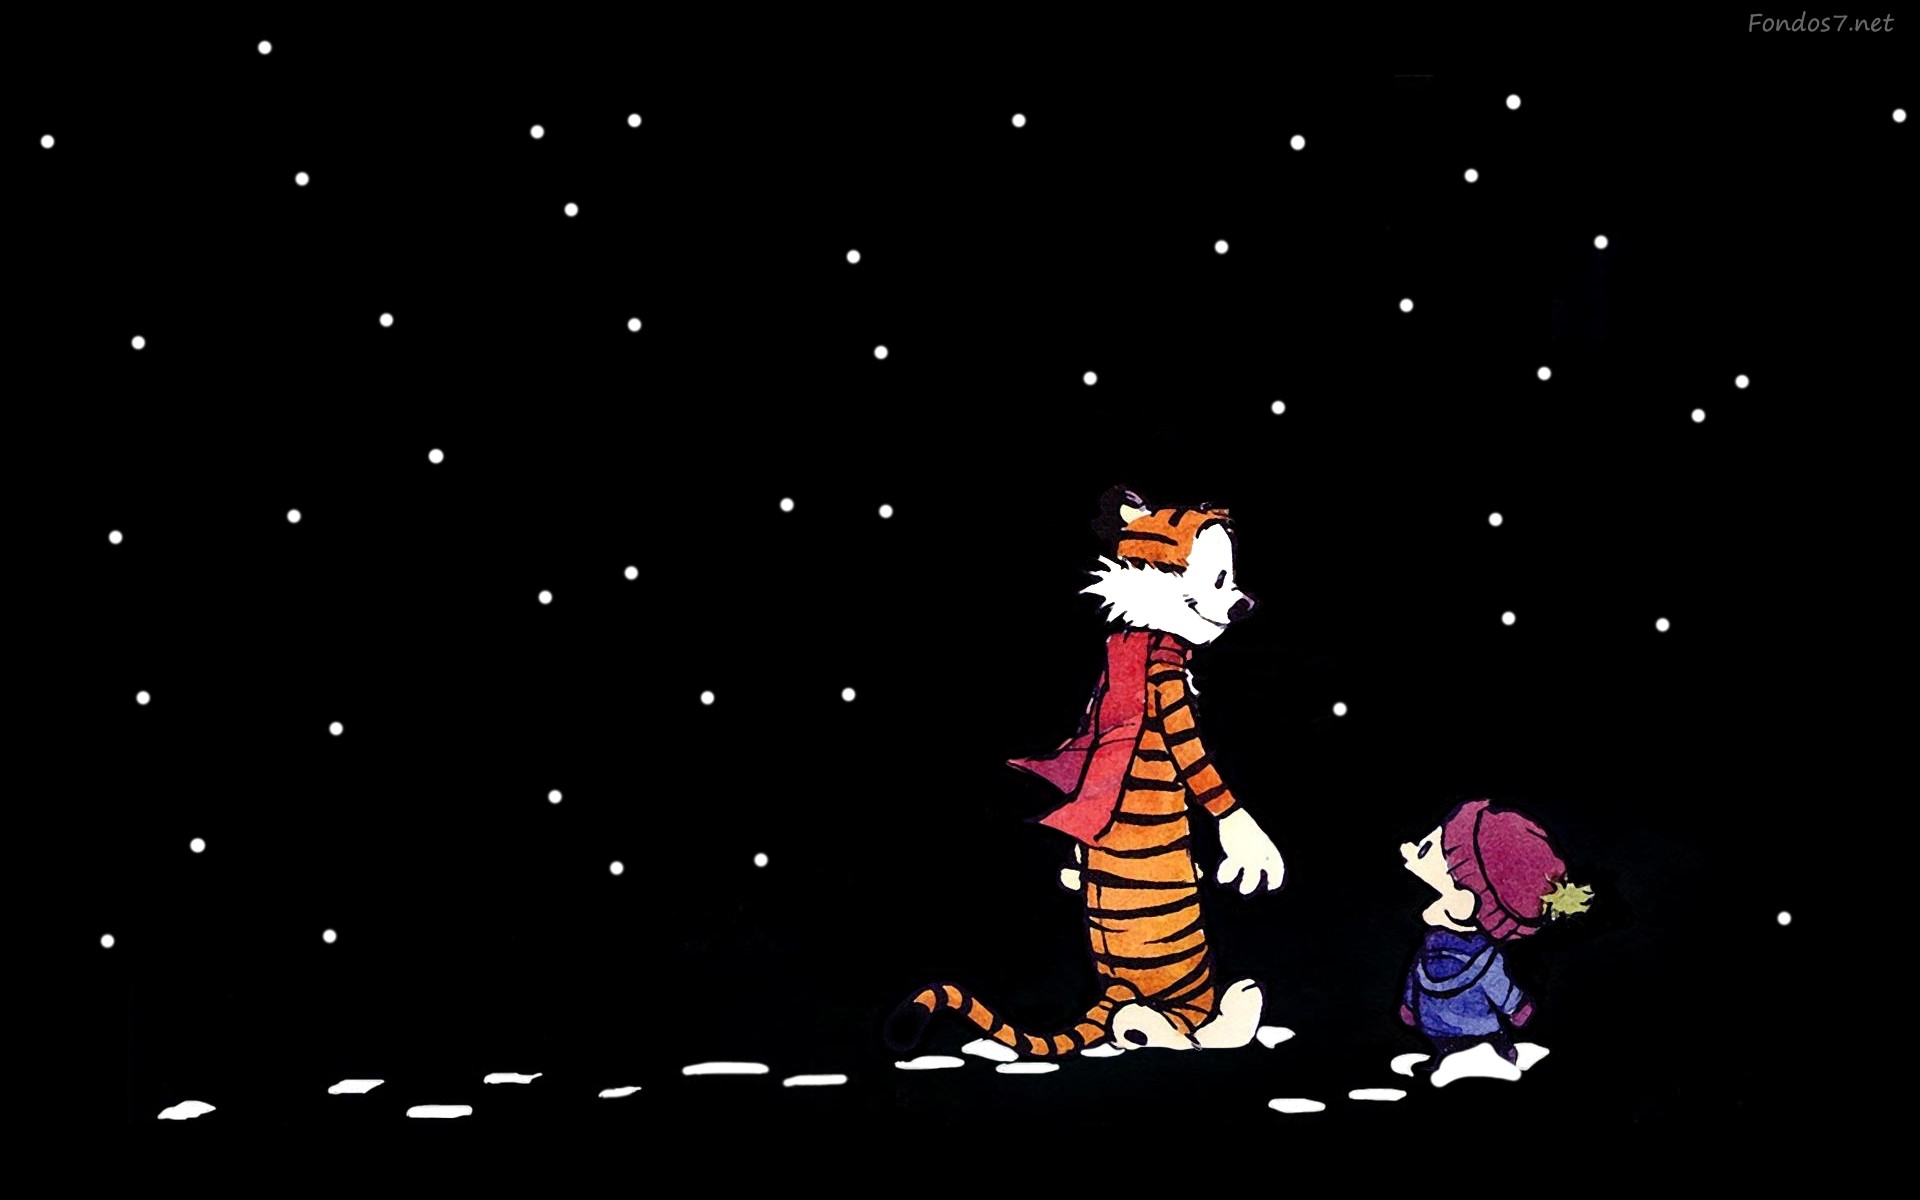 1920x1200 Related searches for 'Calvin And Hobbes Iphone Wallpaper':